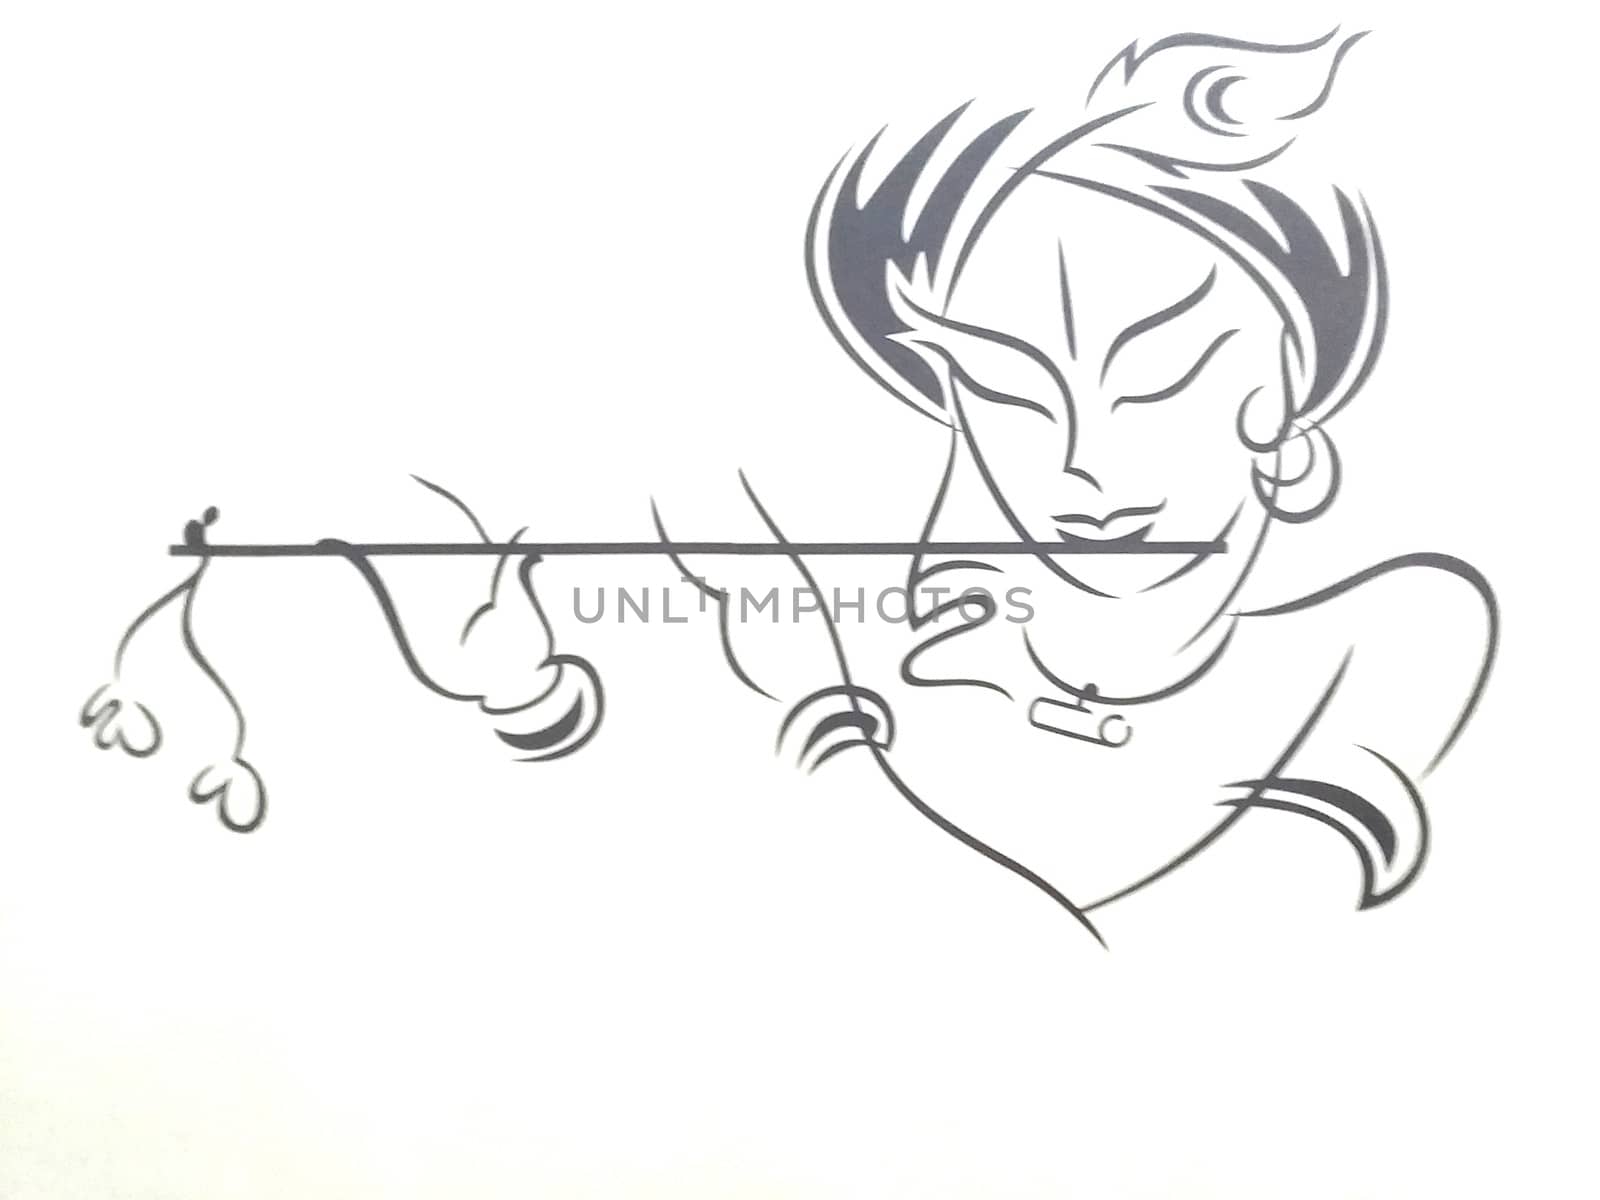 Sketch of Lord Krishna the Indian deity